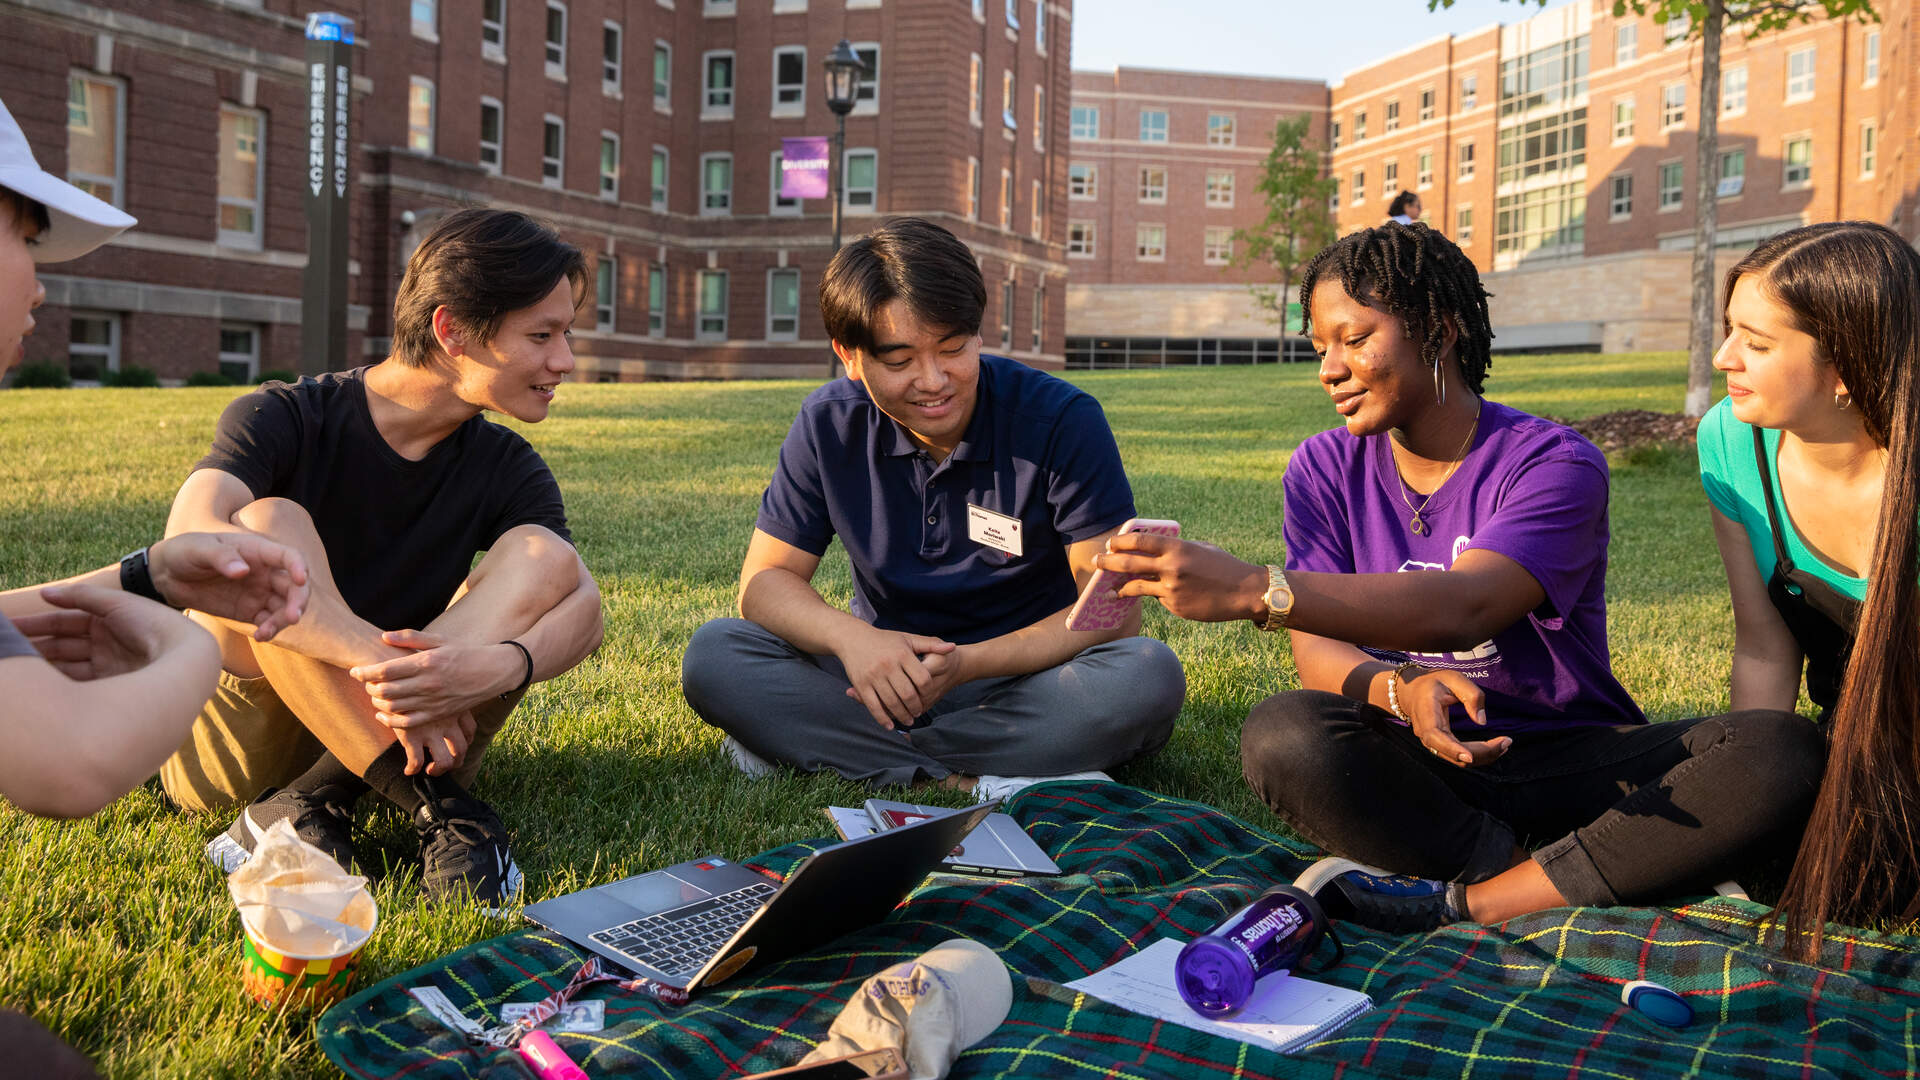 Group of students smiling on the lawn